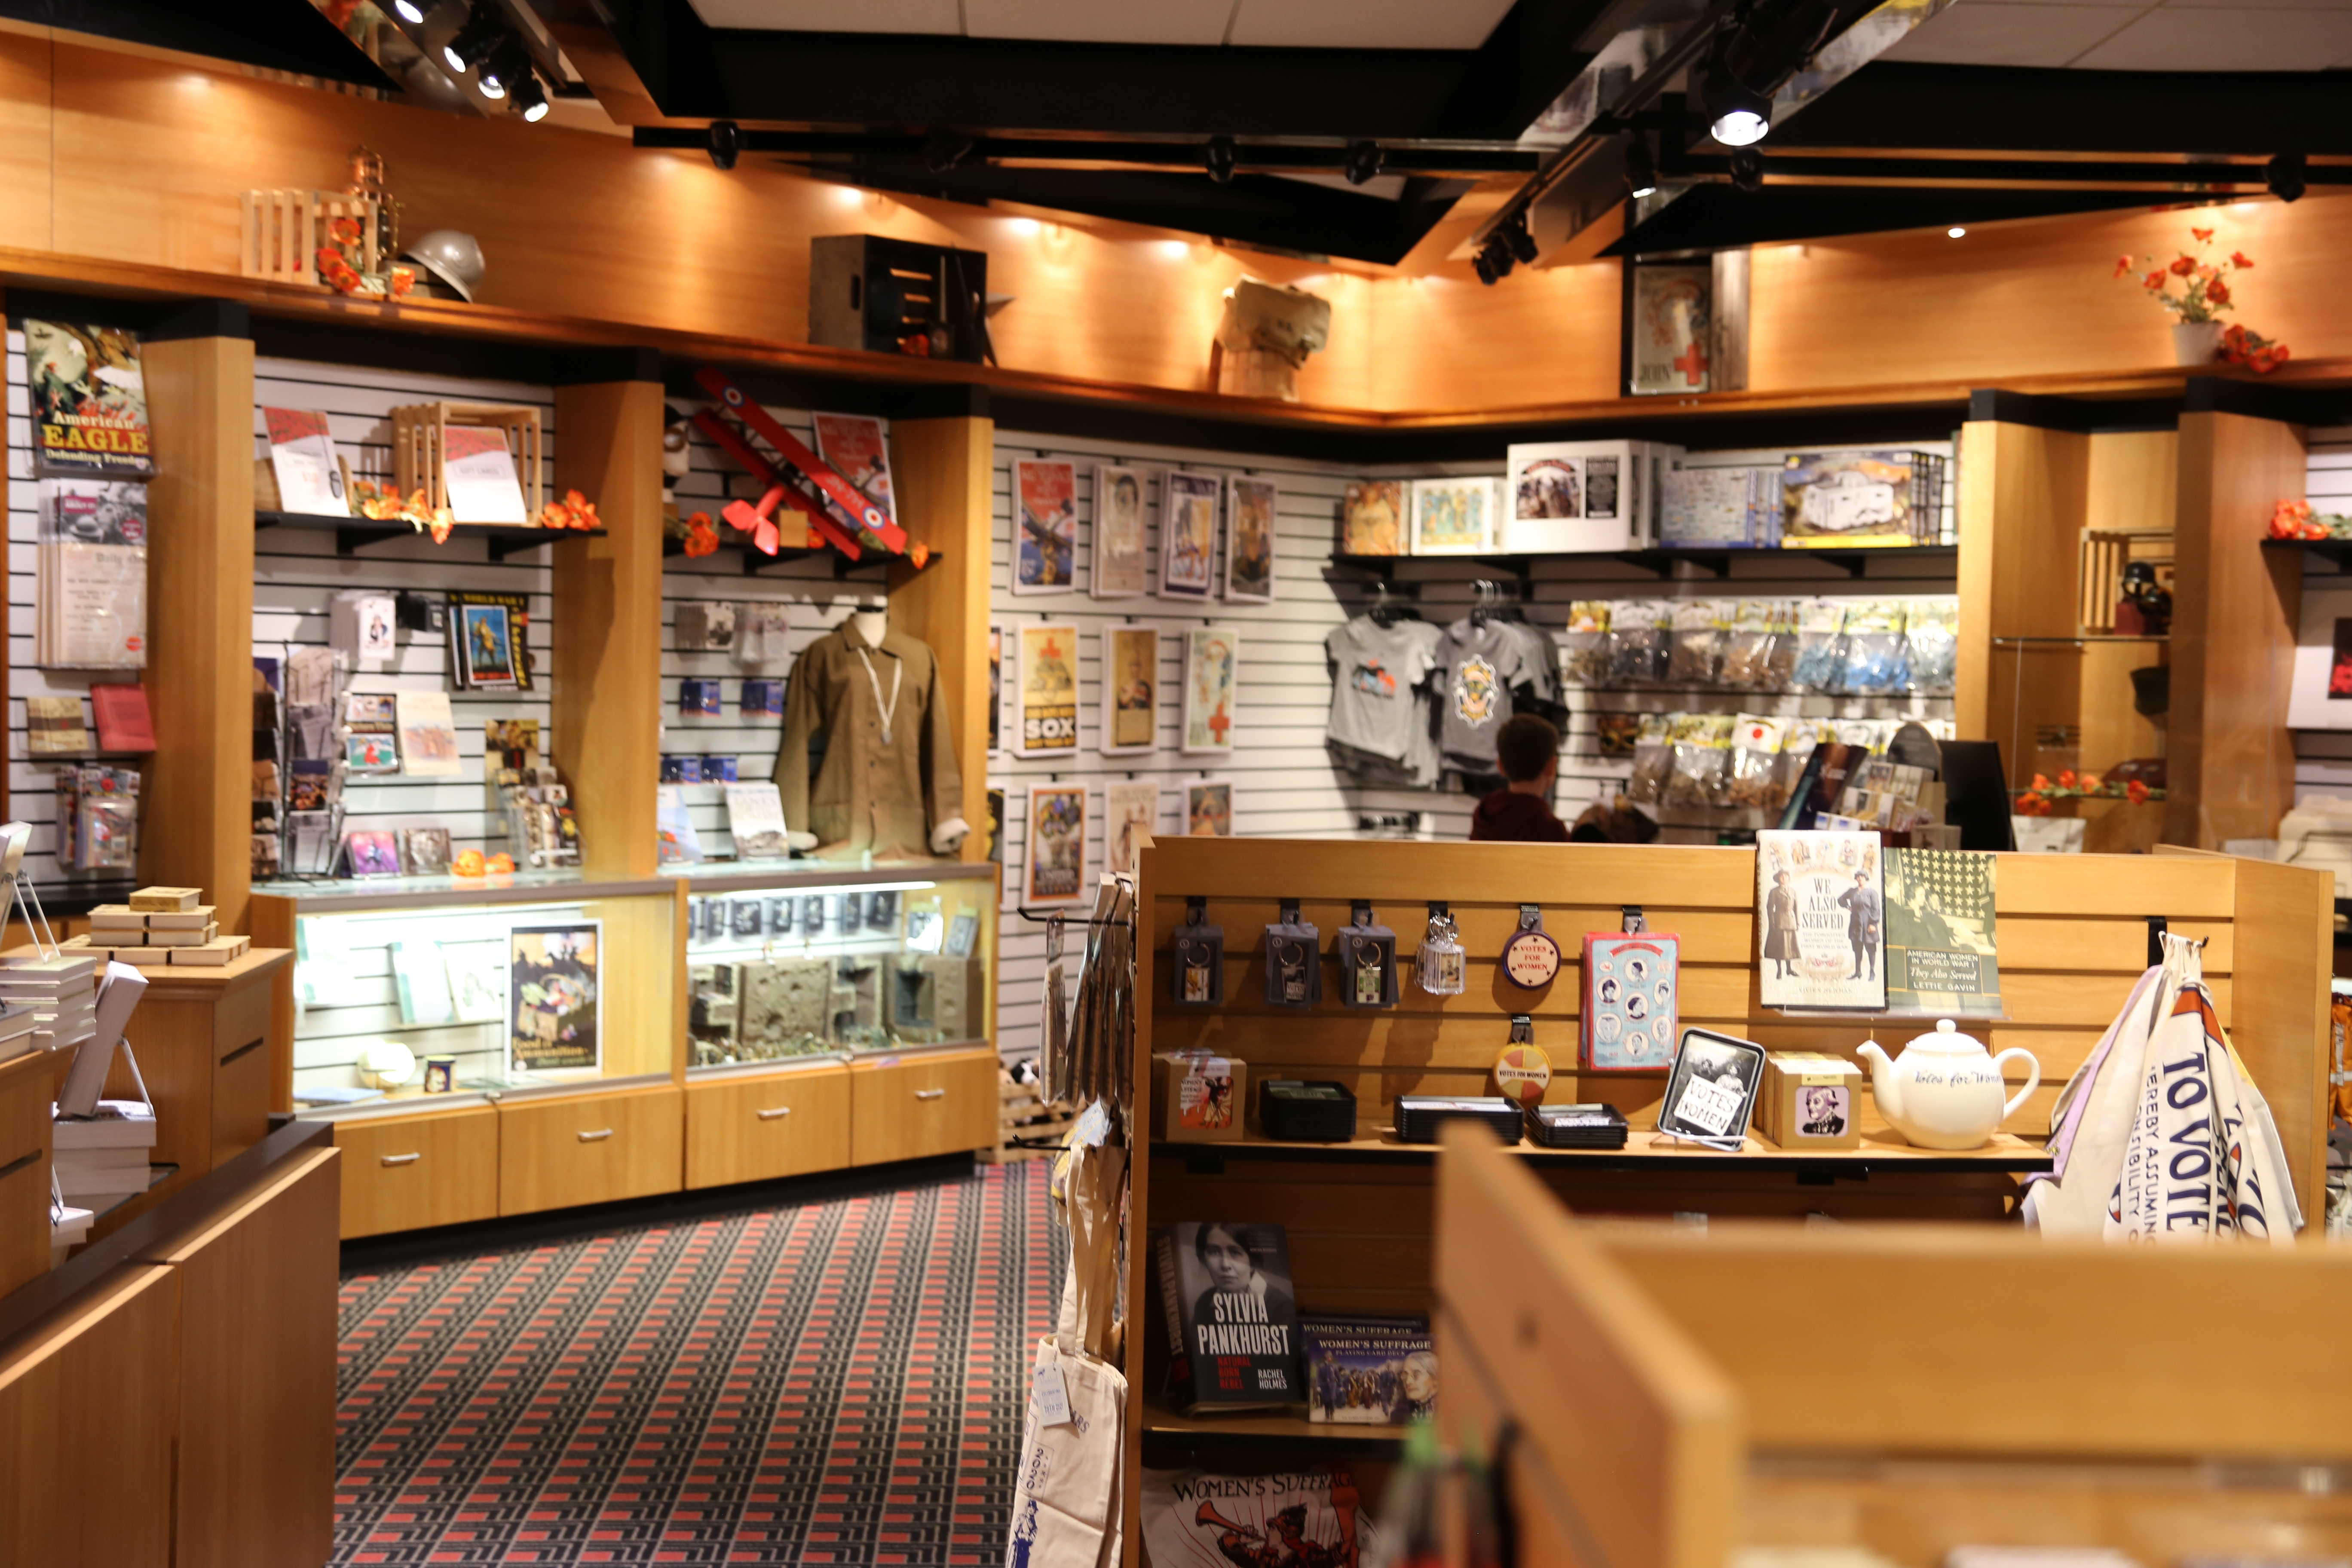 Interior of the museum store with shelves of gifts, t-shirts, and other items